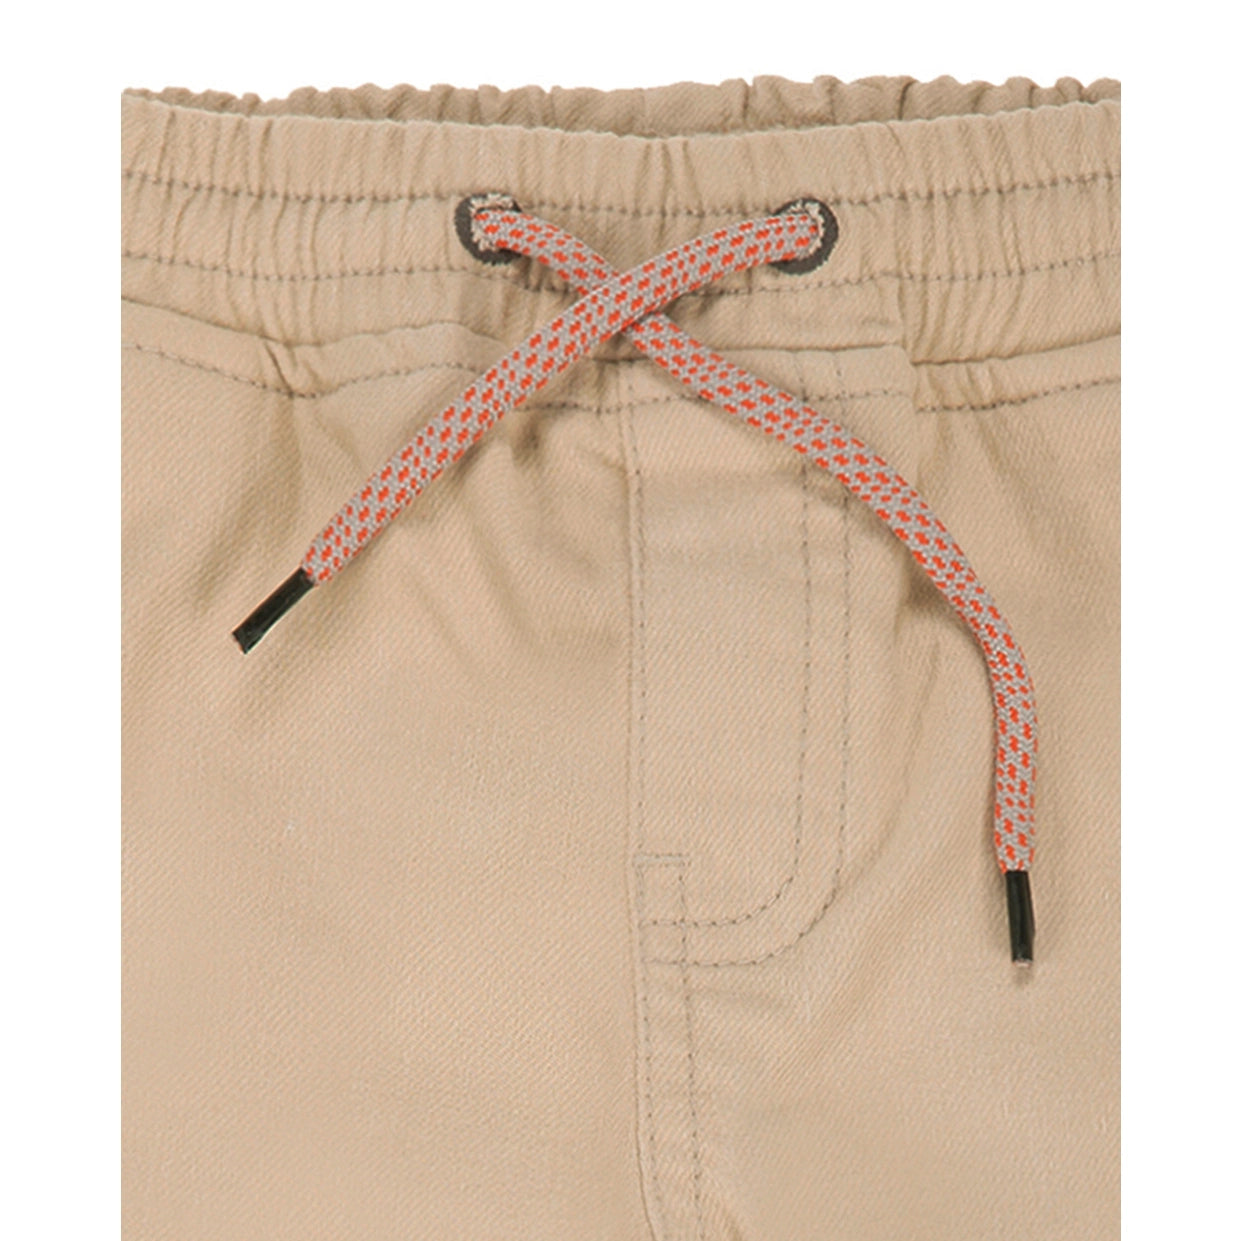 Children's trousers in stone-coloured stretch twill.